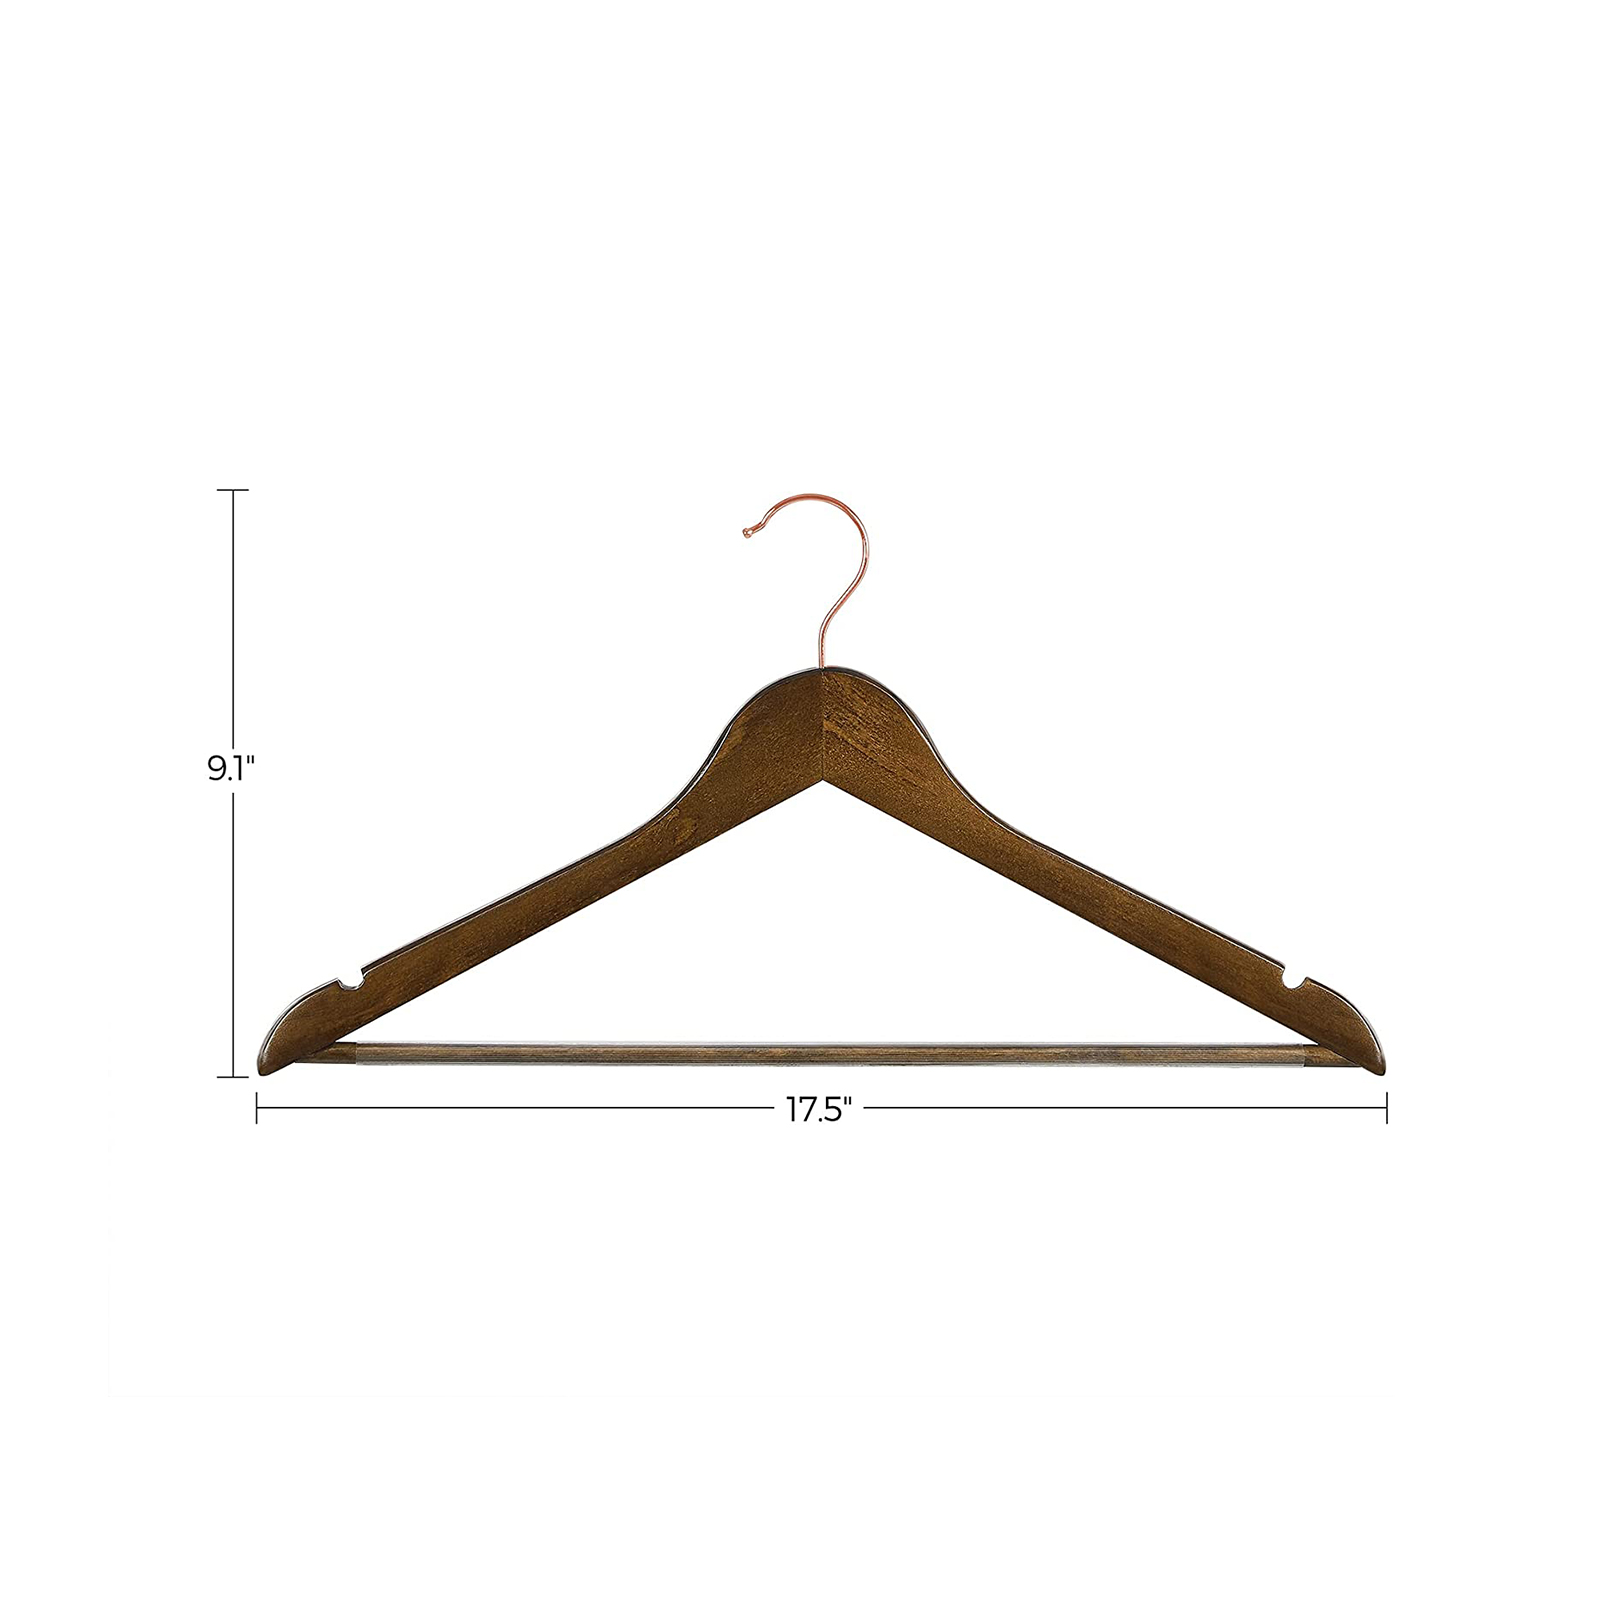 Wood Clothes Hangers for Suit on Sale | Home Storage & Organization ...